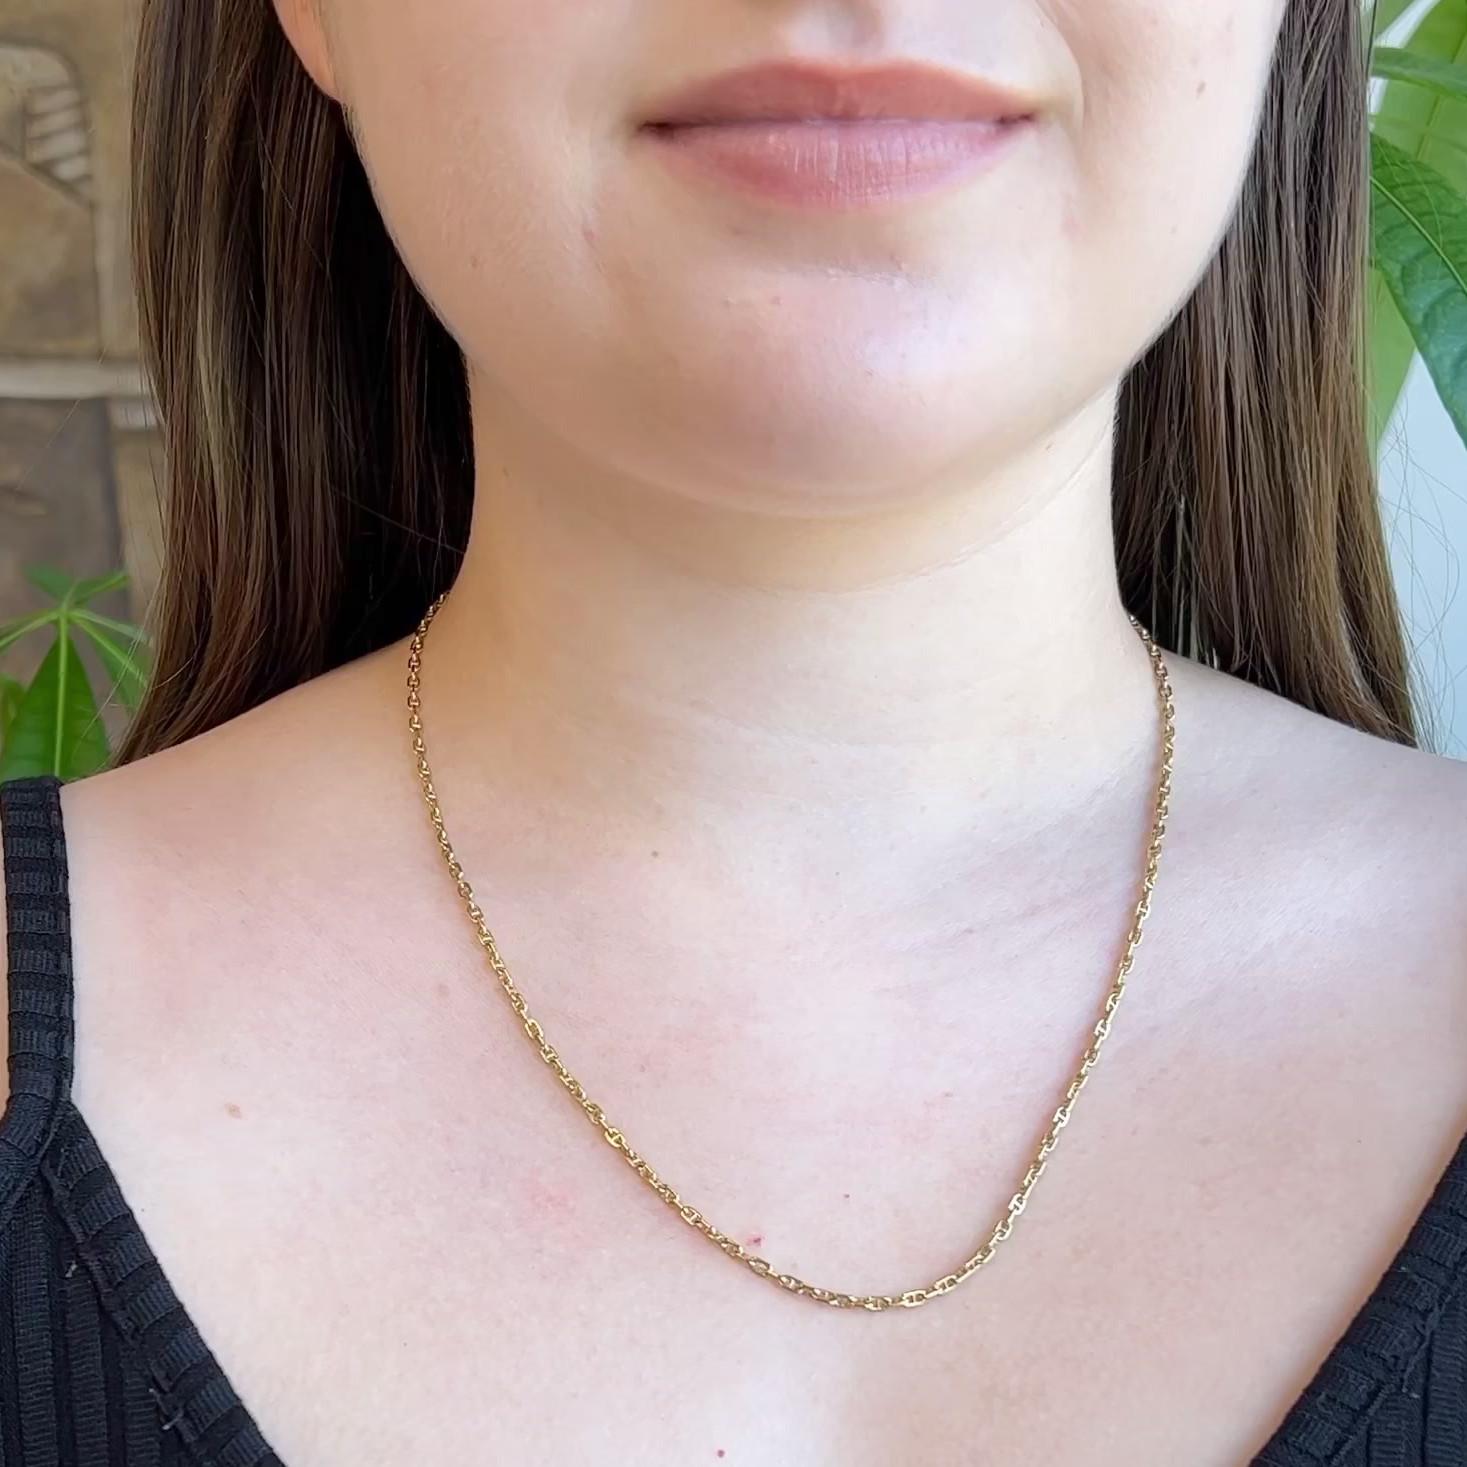 One Vintage Balestra Italian 18 Karat Yellow Gold Gucci Mariner Link Chain Necklace. Crafted in 18 karat yellow gold signed Balestra with Italian hallmarks. Circa 1980. The necklace is 20 inches in length

About this Item: Add a sleek classic